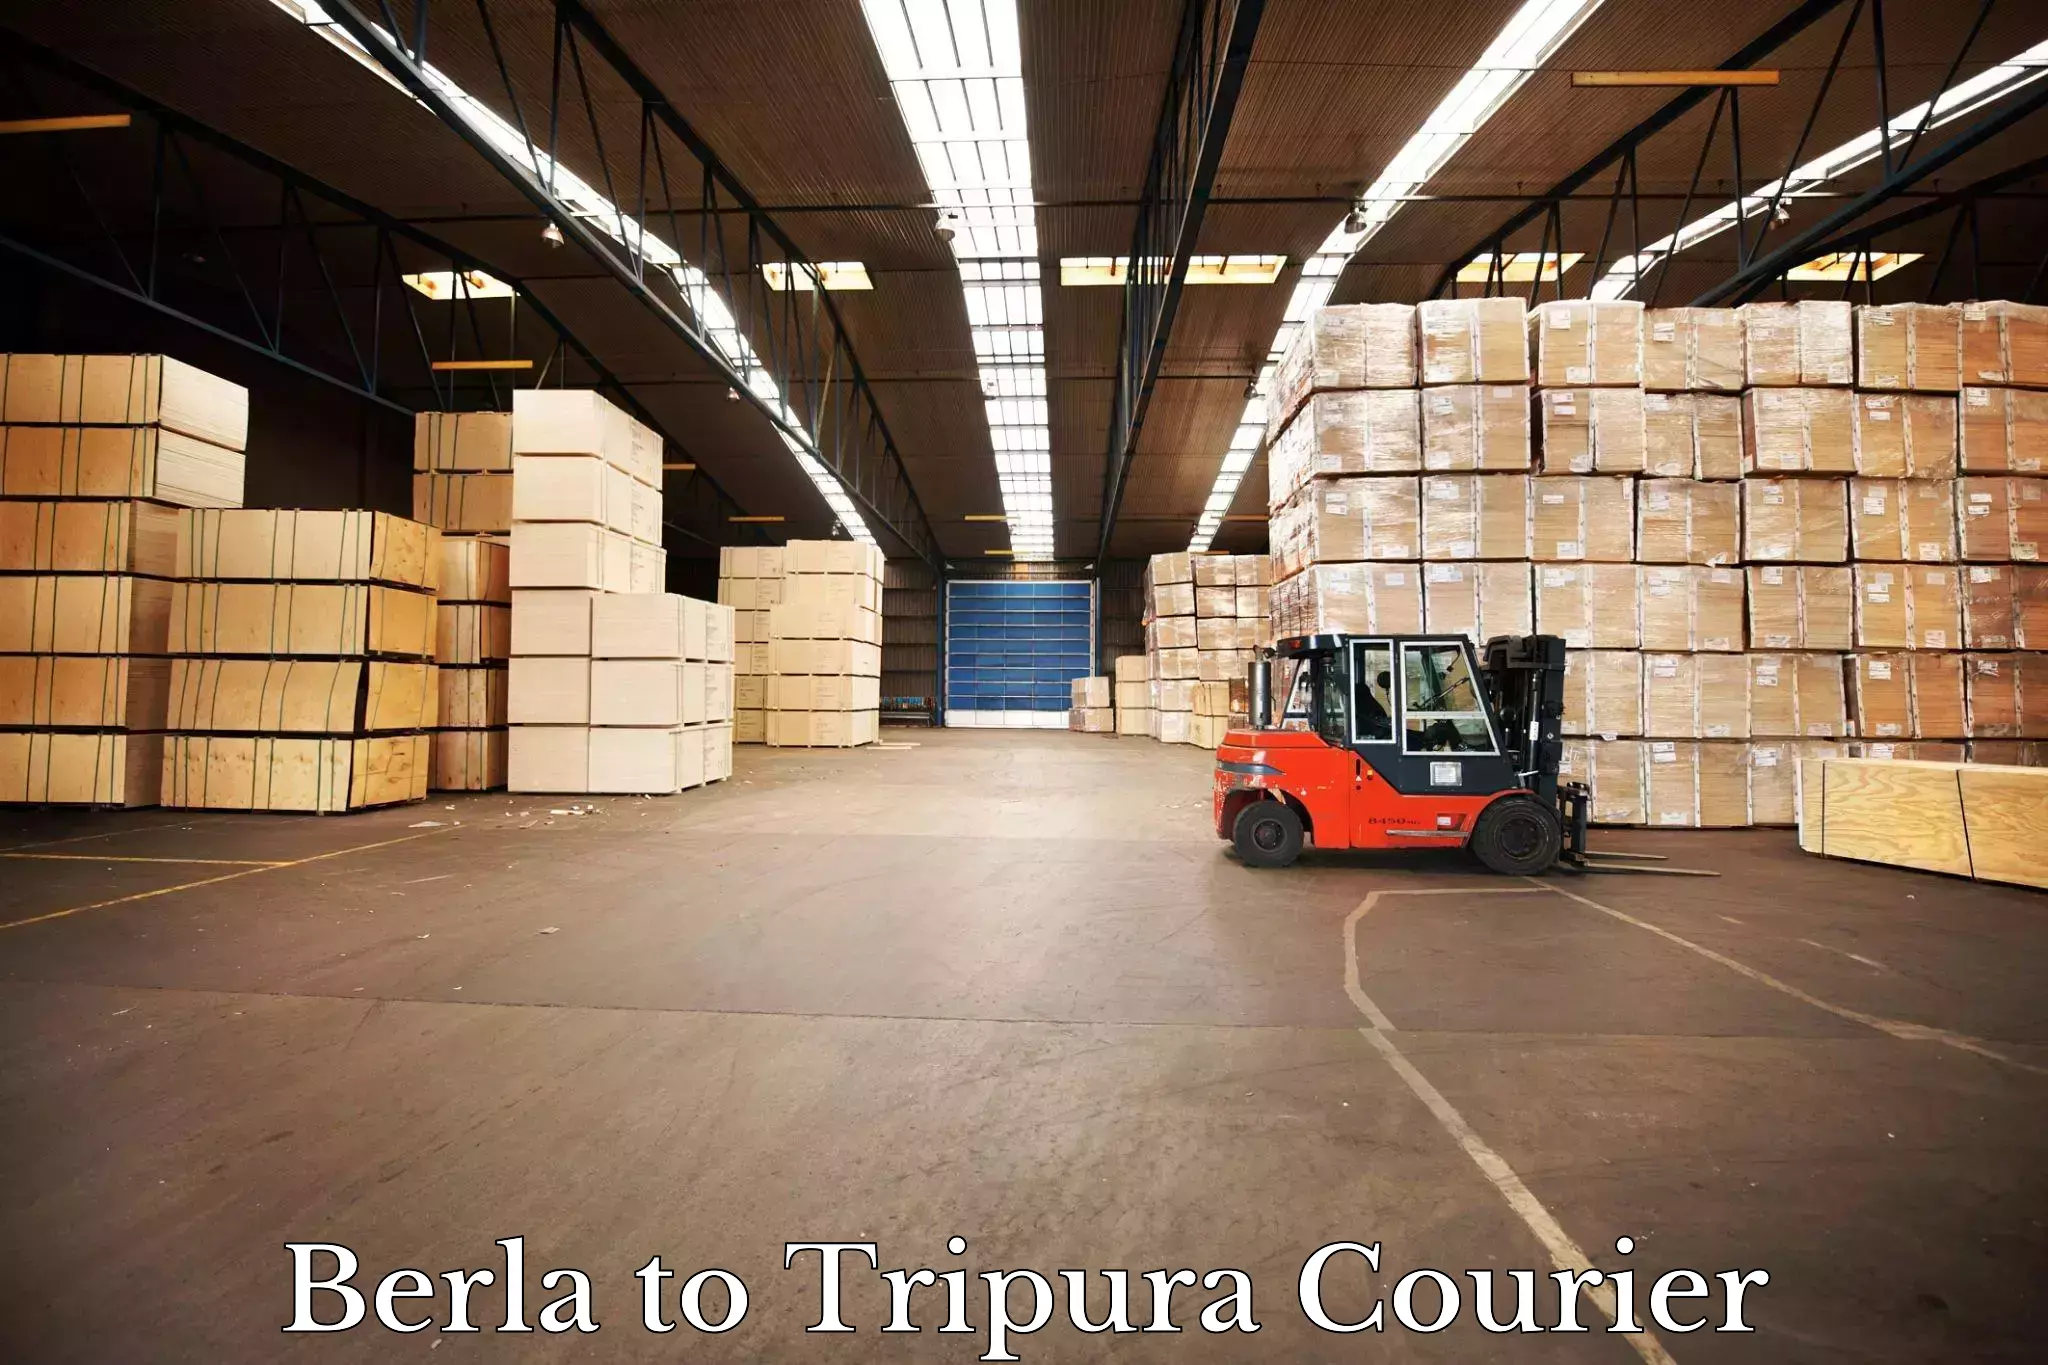 On-call courier service Berla to Udaipur Tripura